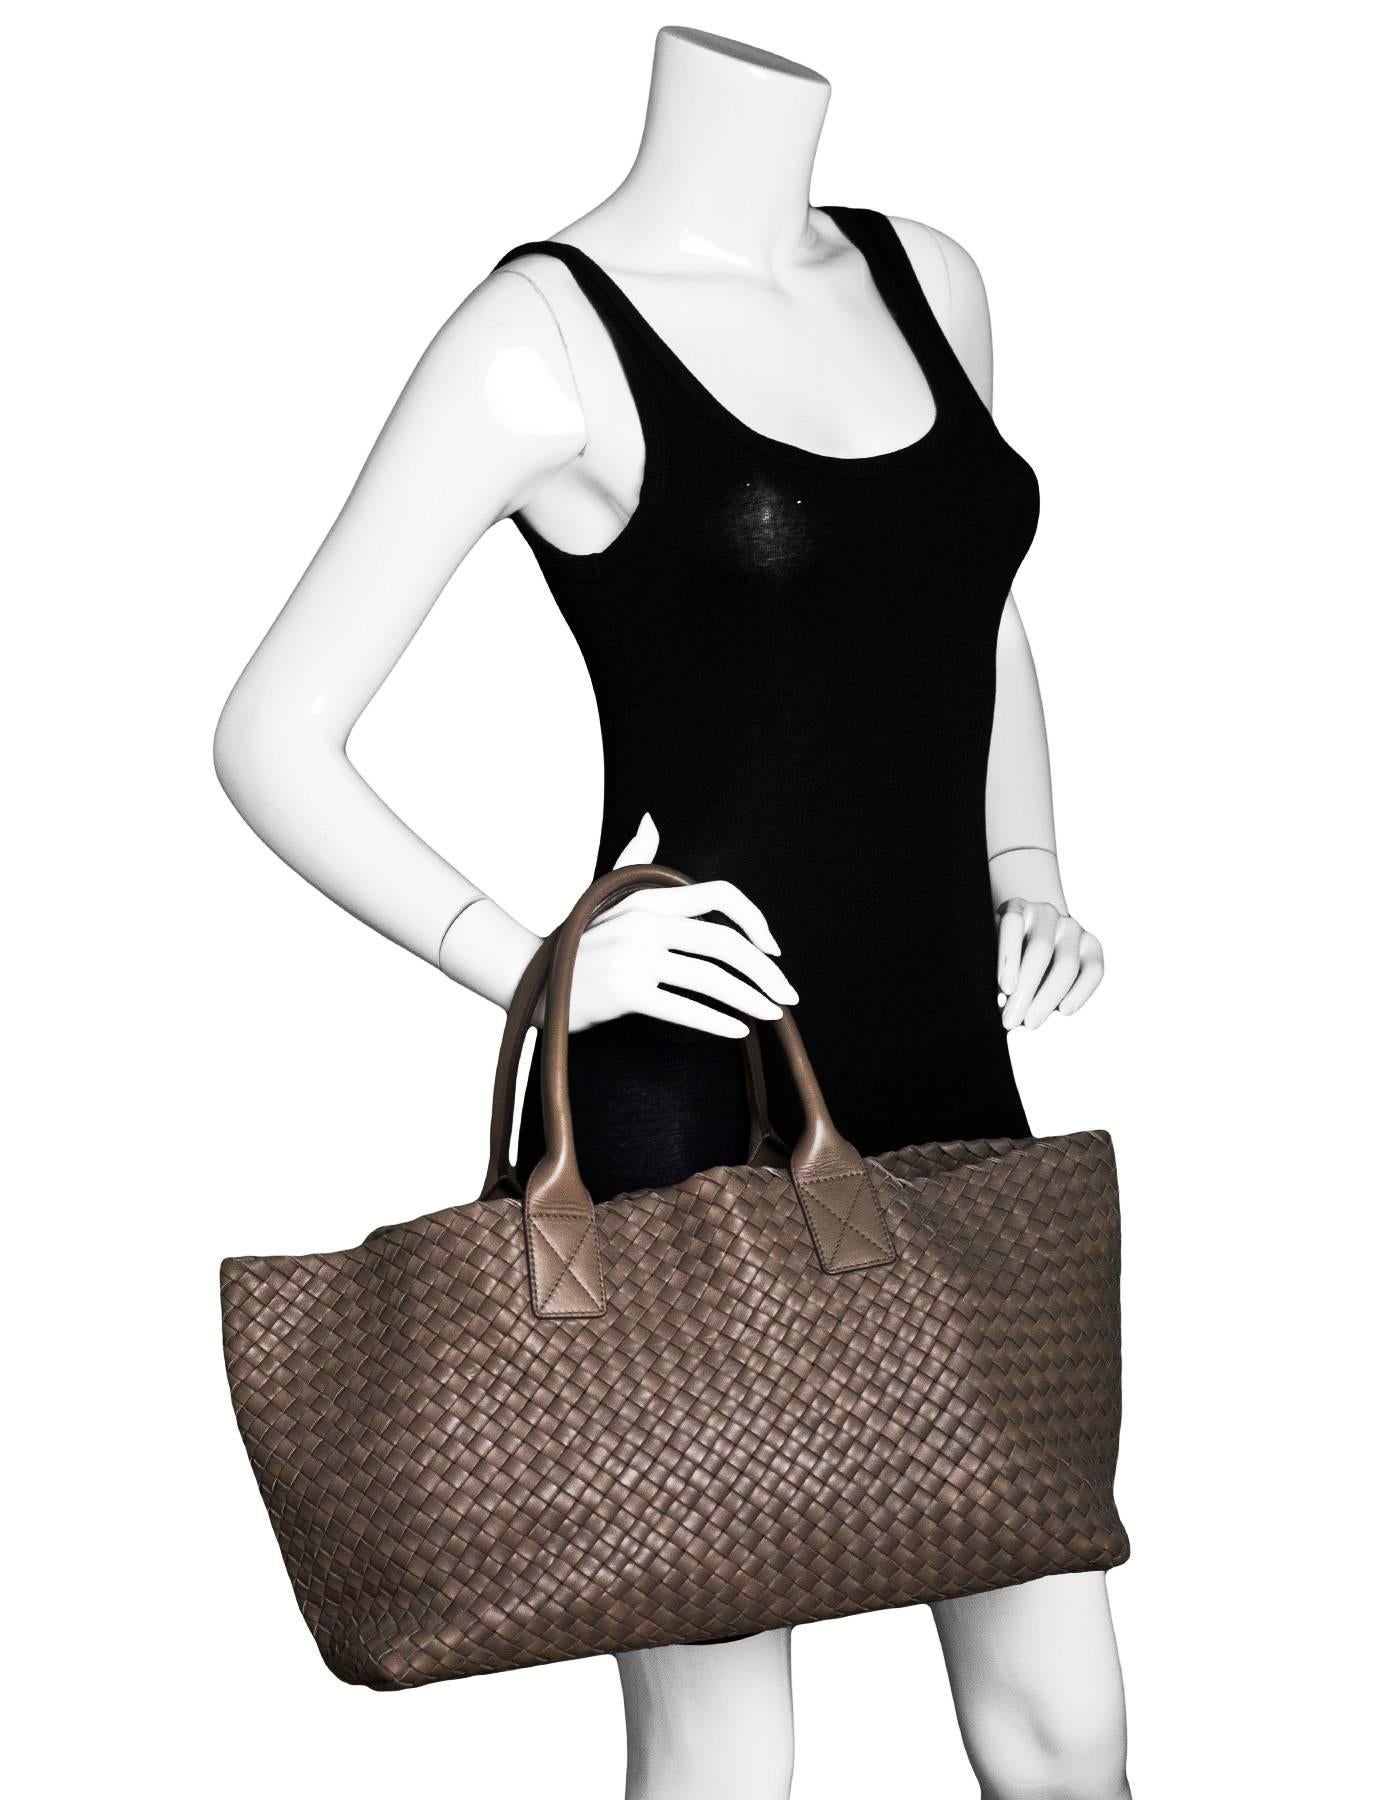 Bottega Veneta Taupe Leather Intrecciato Cabat Tote
The Cabat is one of Bottega's signature bags designed by Tomas Maier’s. This piece is handmade  woven entirely in soft nappa leather with has zero seams.

Made In: Italy
Color: Taupe
Hardware: